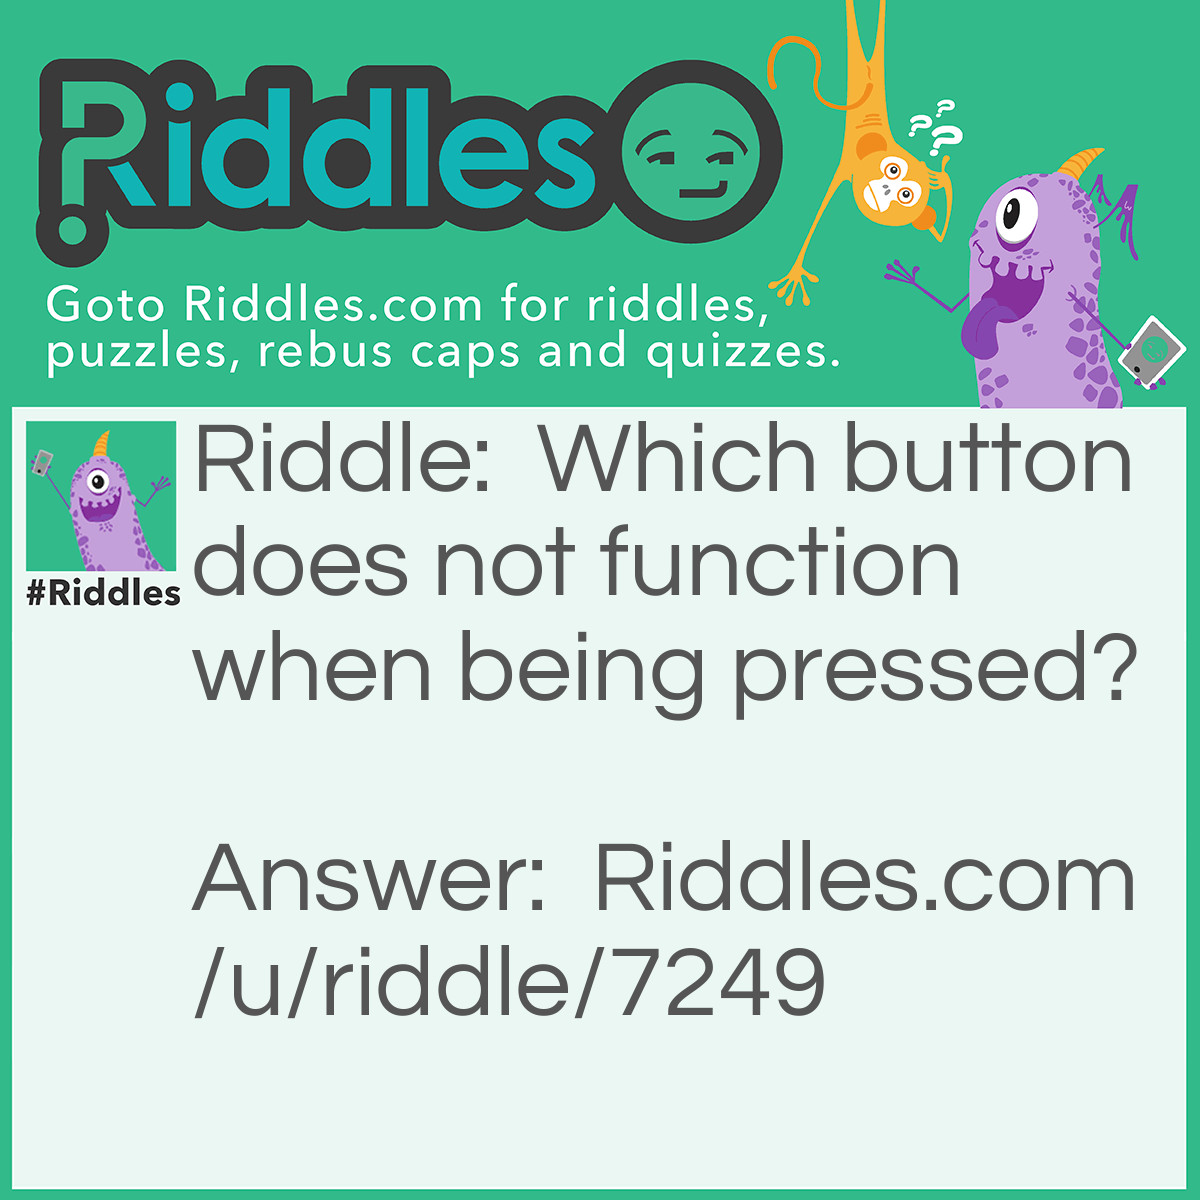 Riddle: Which button does not function when being pressed? Answer: Belly button.